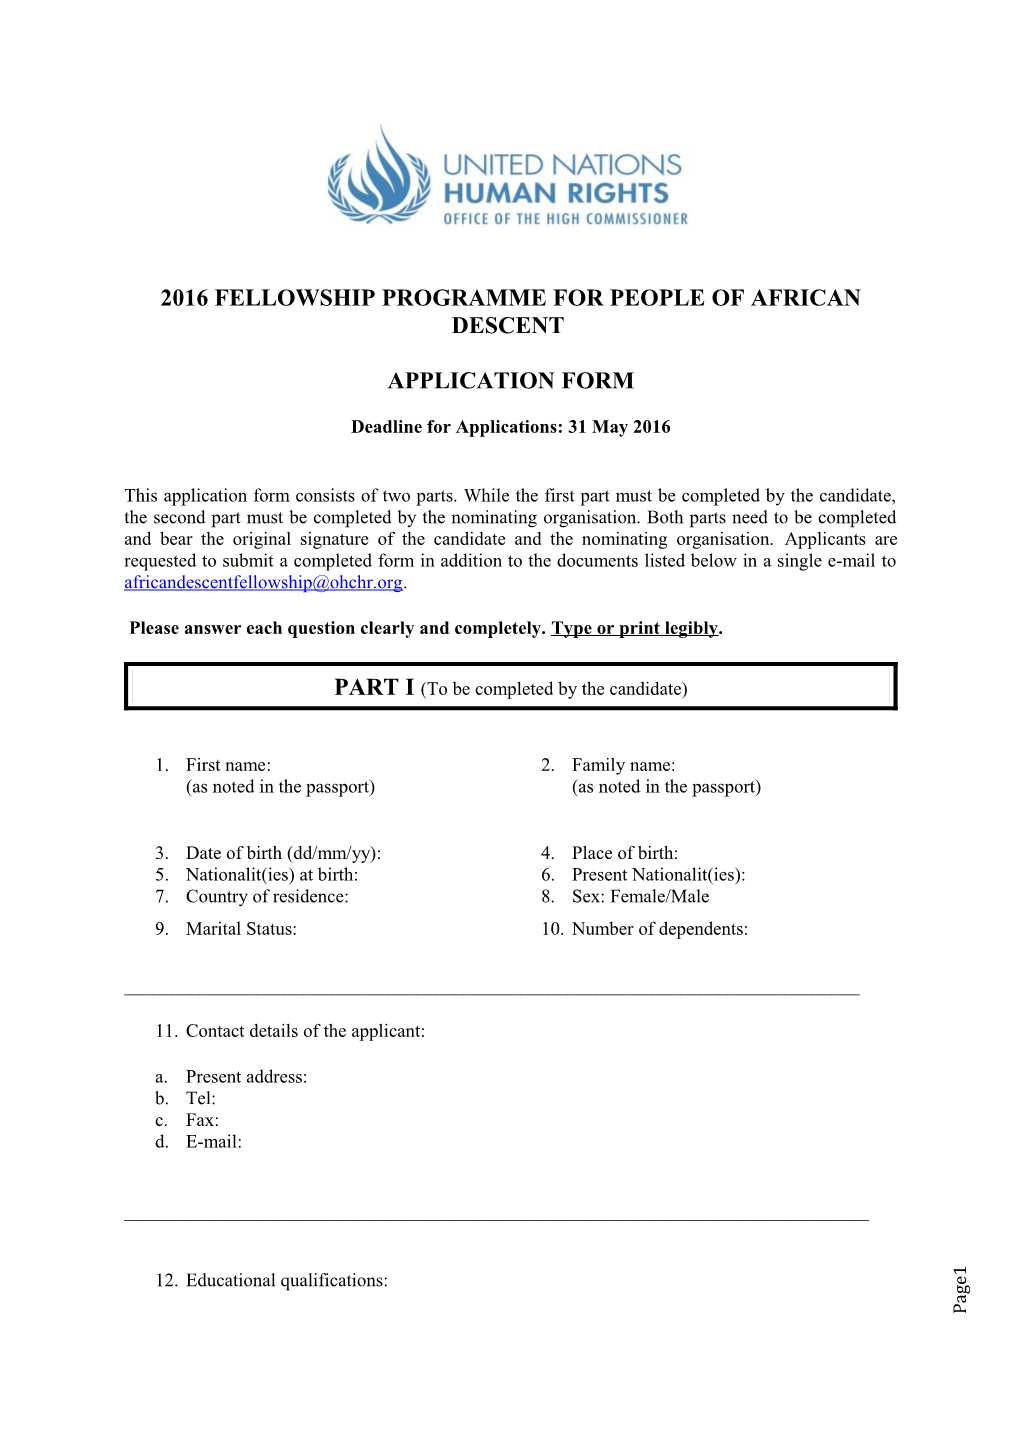 2016 Fellowship Programme for People of African Descent